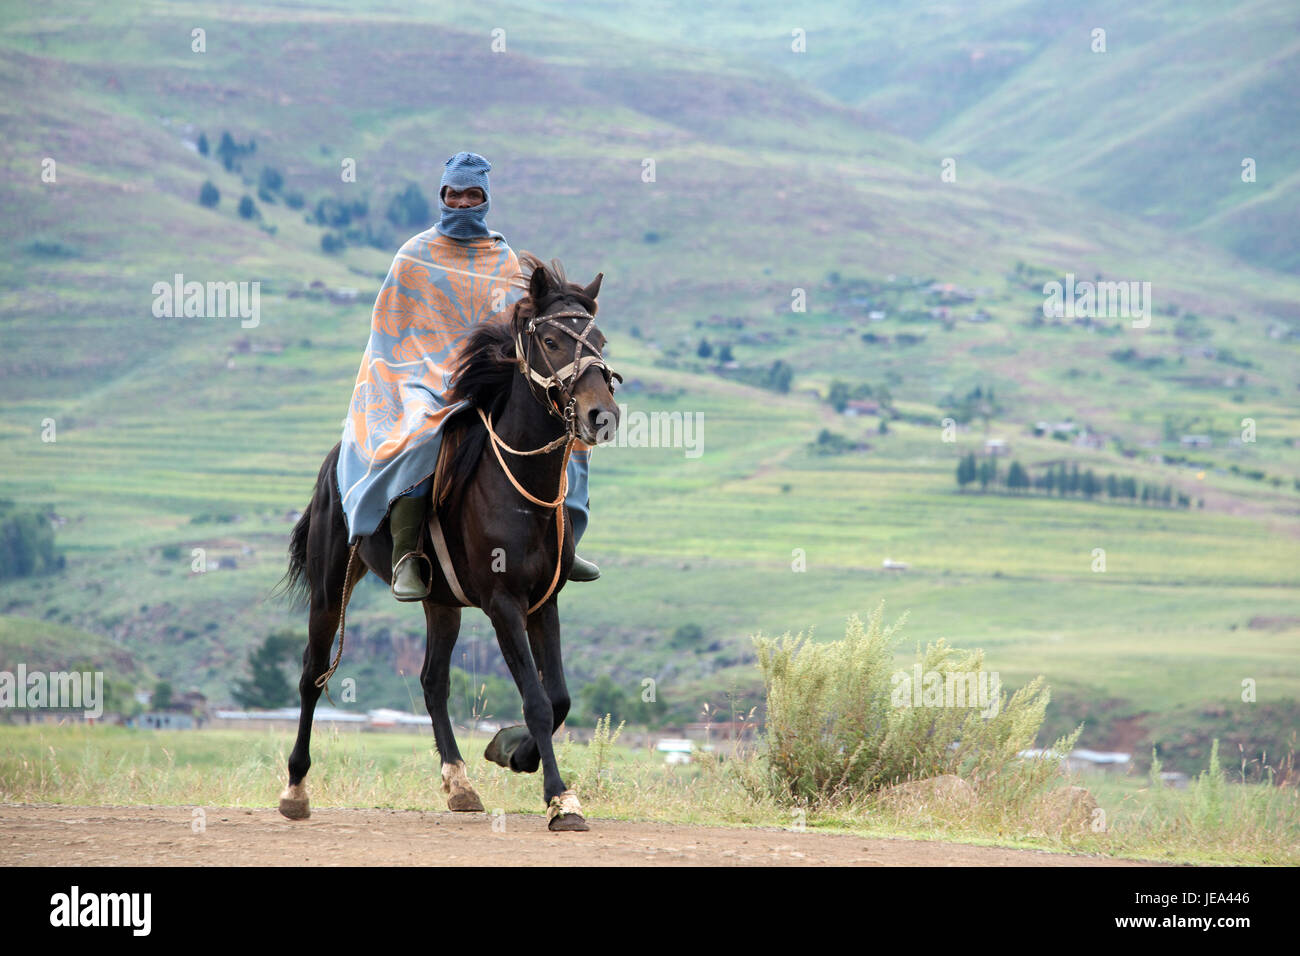 Farmer wearing traditional clothes riding horse Thaba-Tseka District Lesotho Southern Africa Stock Photo